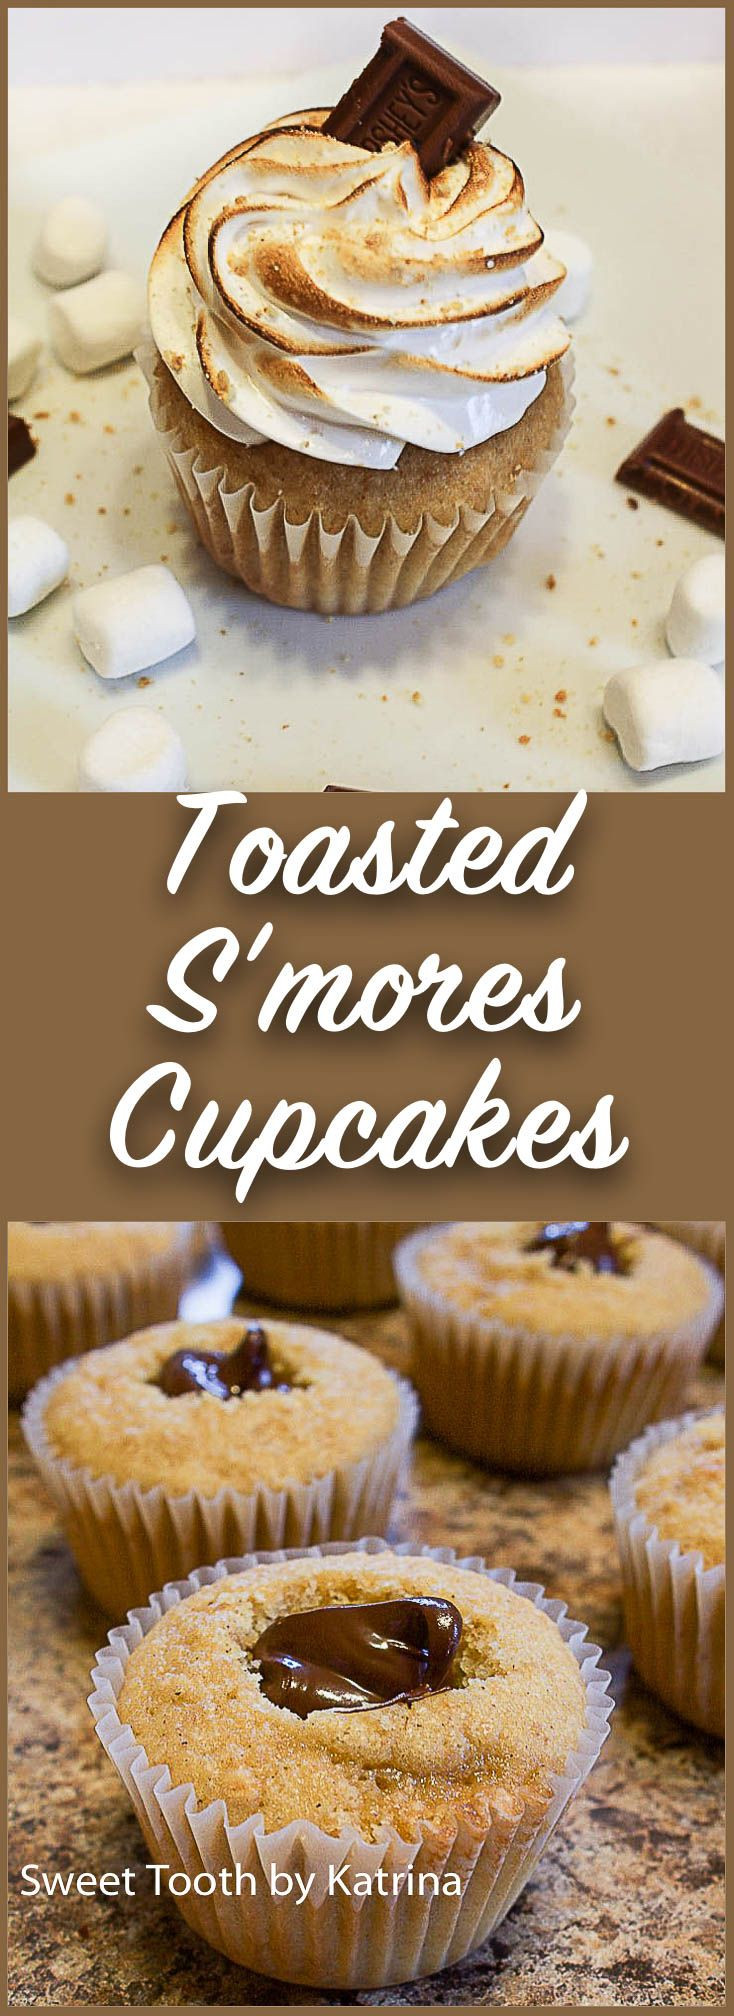 Gourmet Cupcakes Recipes
 Hershey’s Filled S’mores Cupcakes